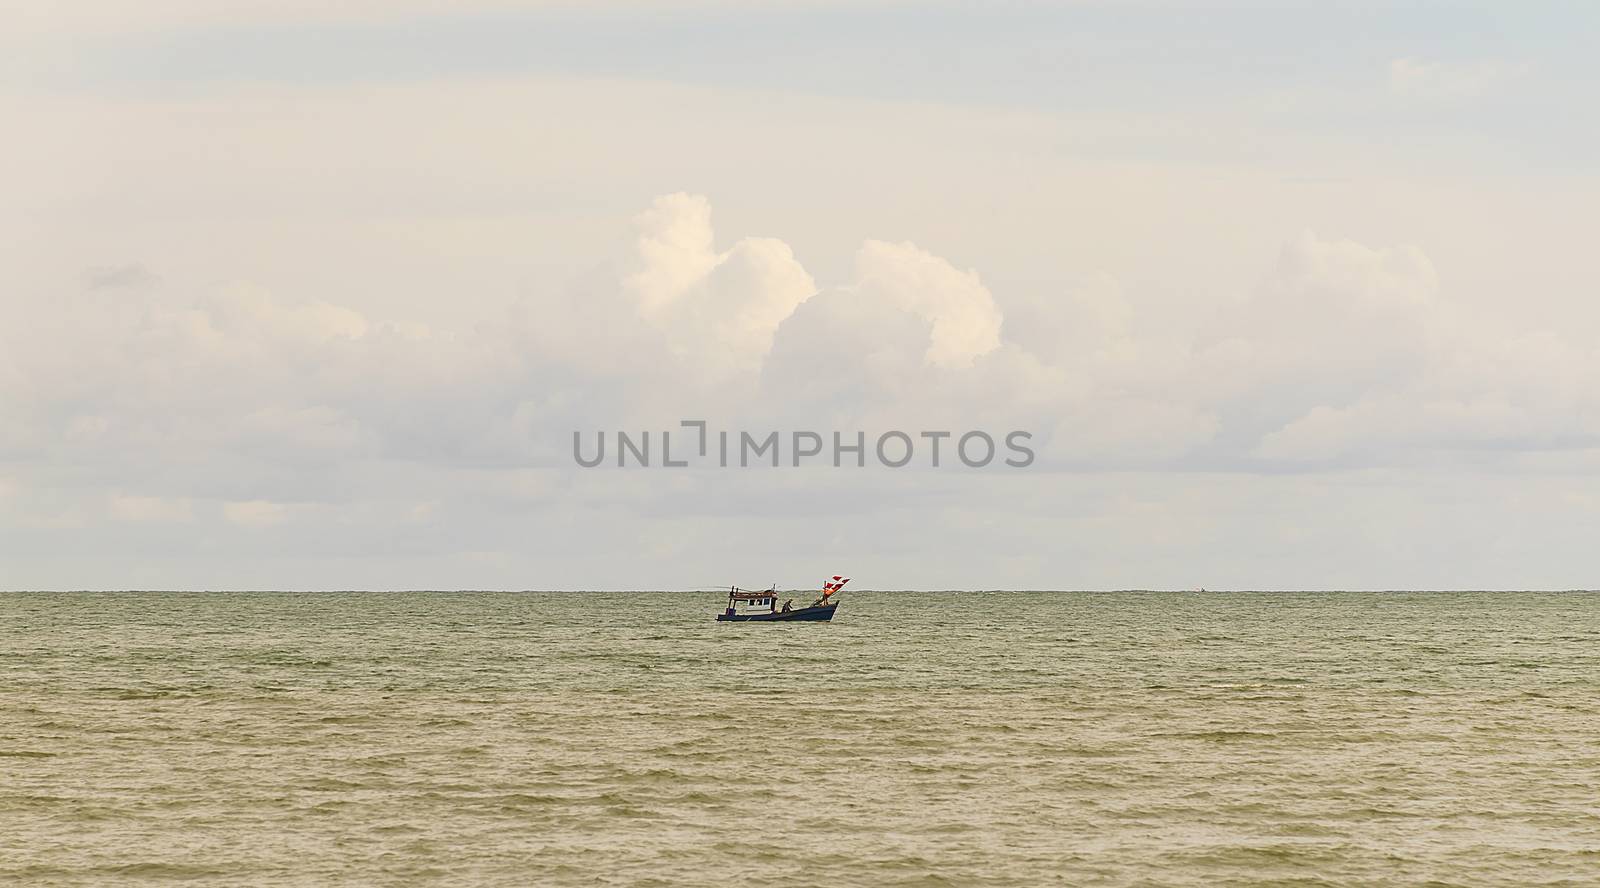 boat in blue sea with clouds sky background in Thailand. Relaxing moments in summer seasons travel. Tropical nature in vacation time.